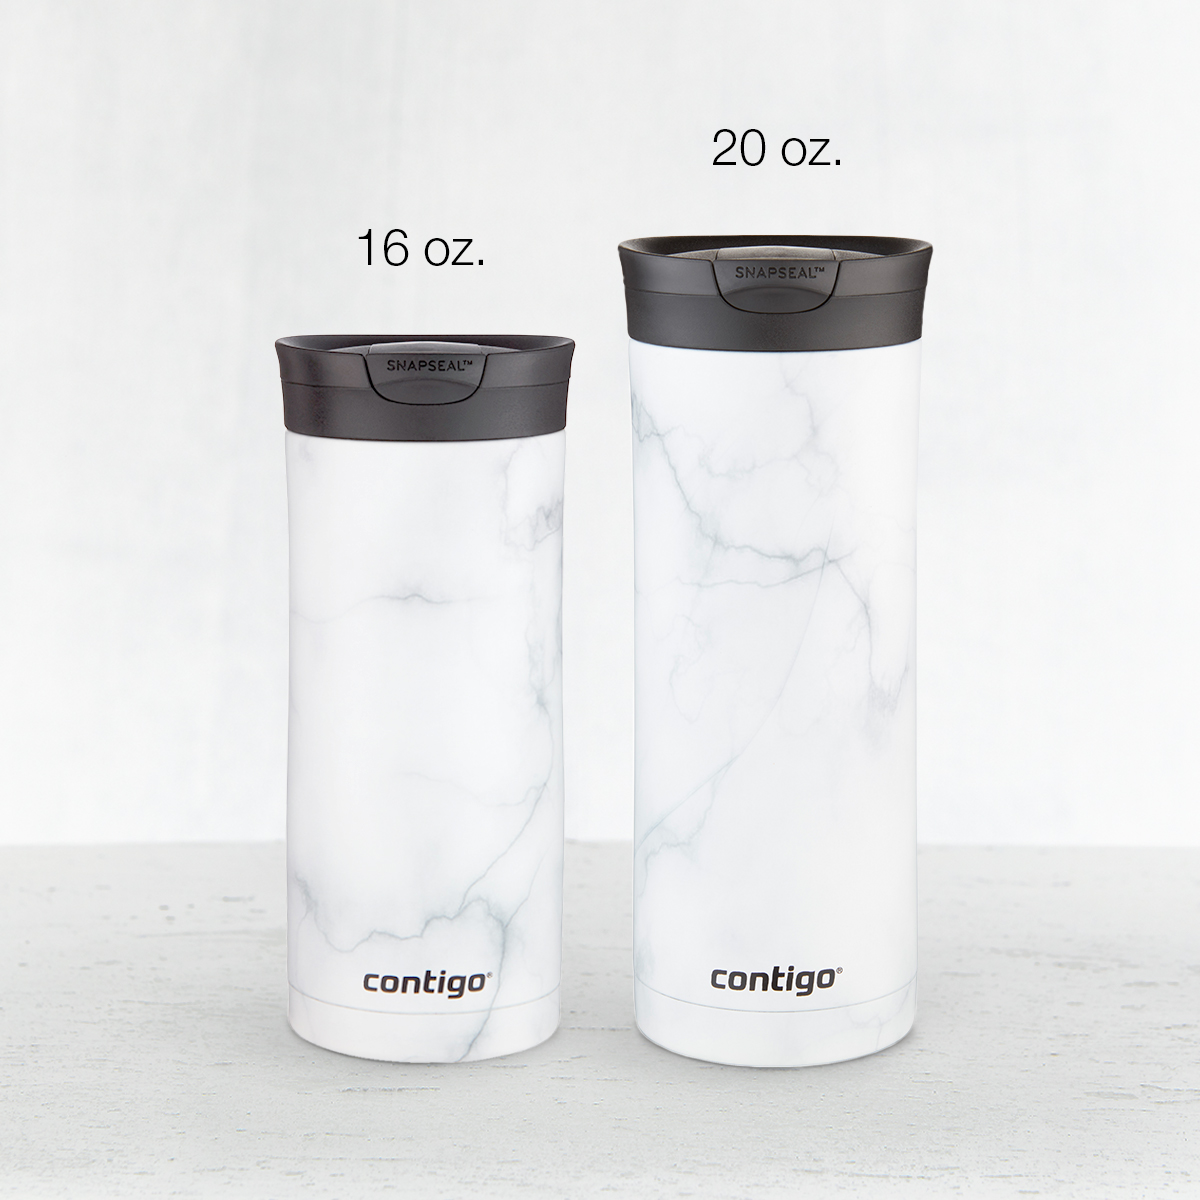 Contigo Couture Huron Stainless Steel Travel Mug with SNAPSEAL Lid White Marble, 20 fl oz. - image 5 of 5